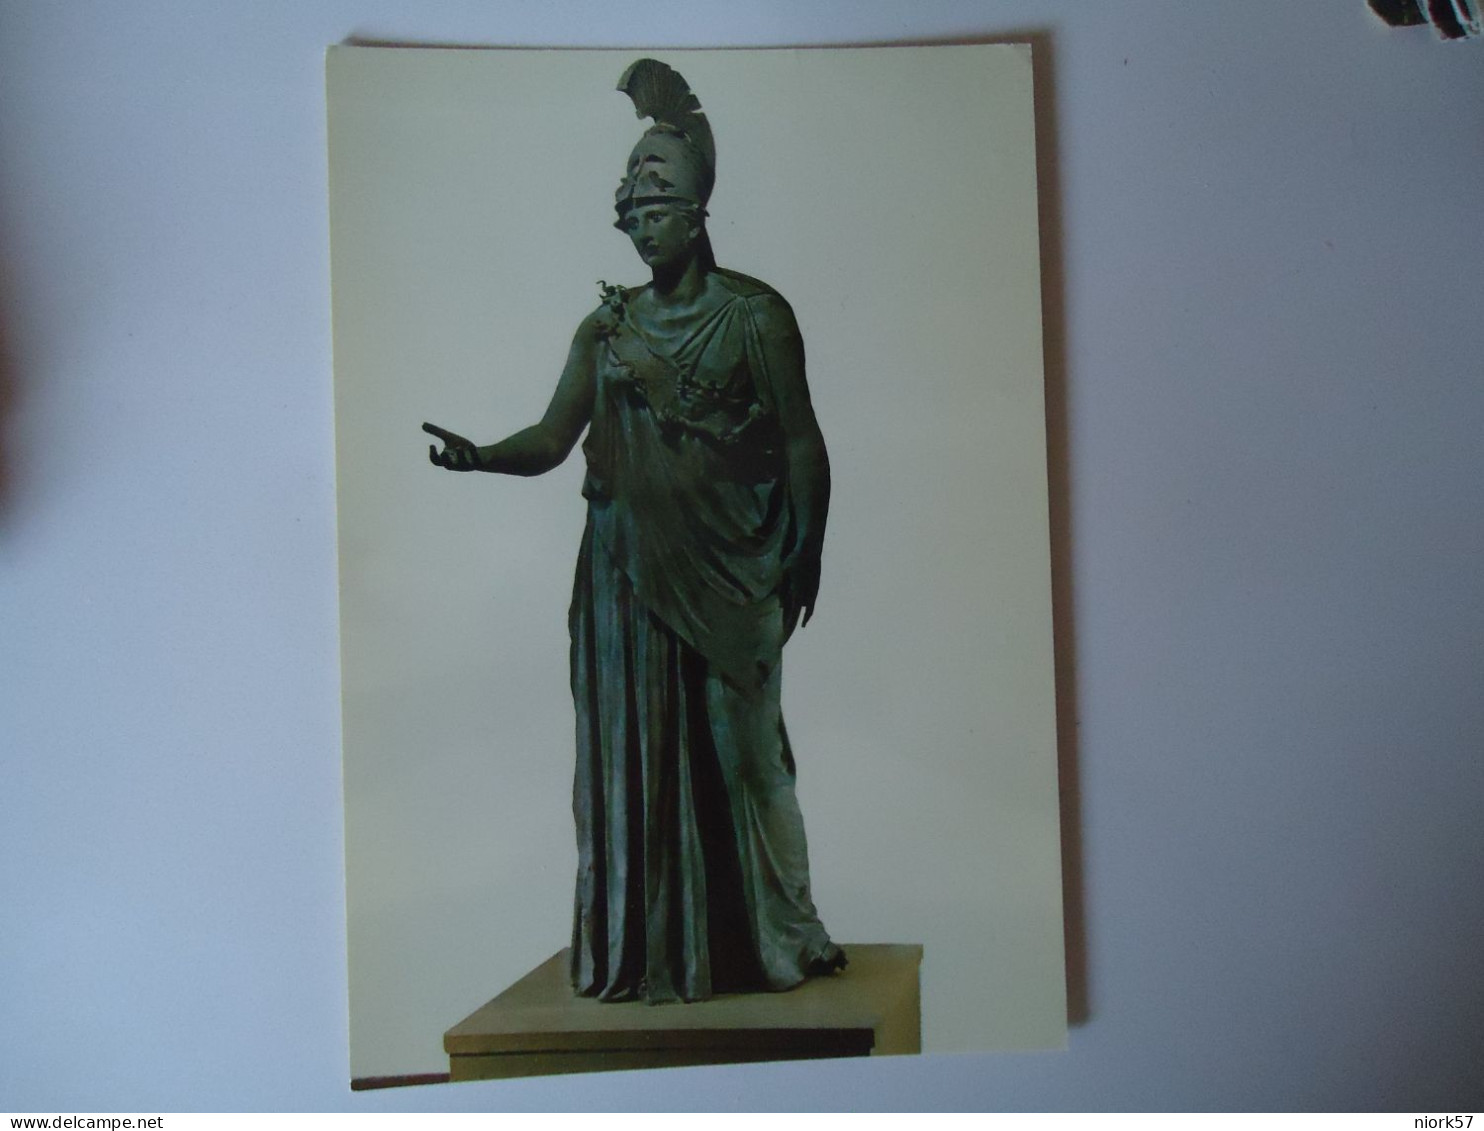 GREECE  POSTCARDS  MUSEUM STATUE ATHENA     FOR MORE PURCHASES 10% DISCOUNT - Grèce